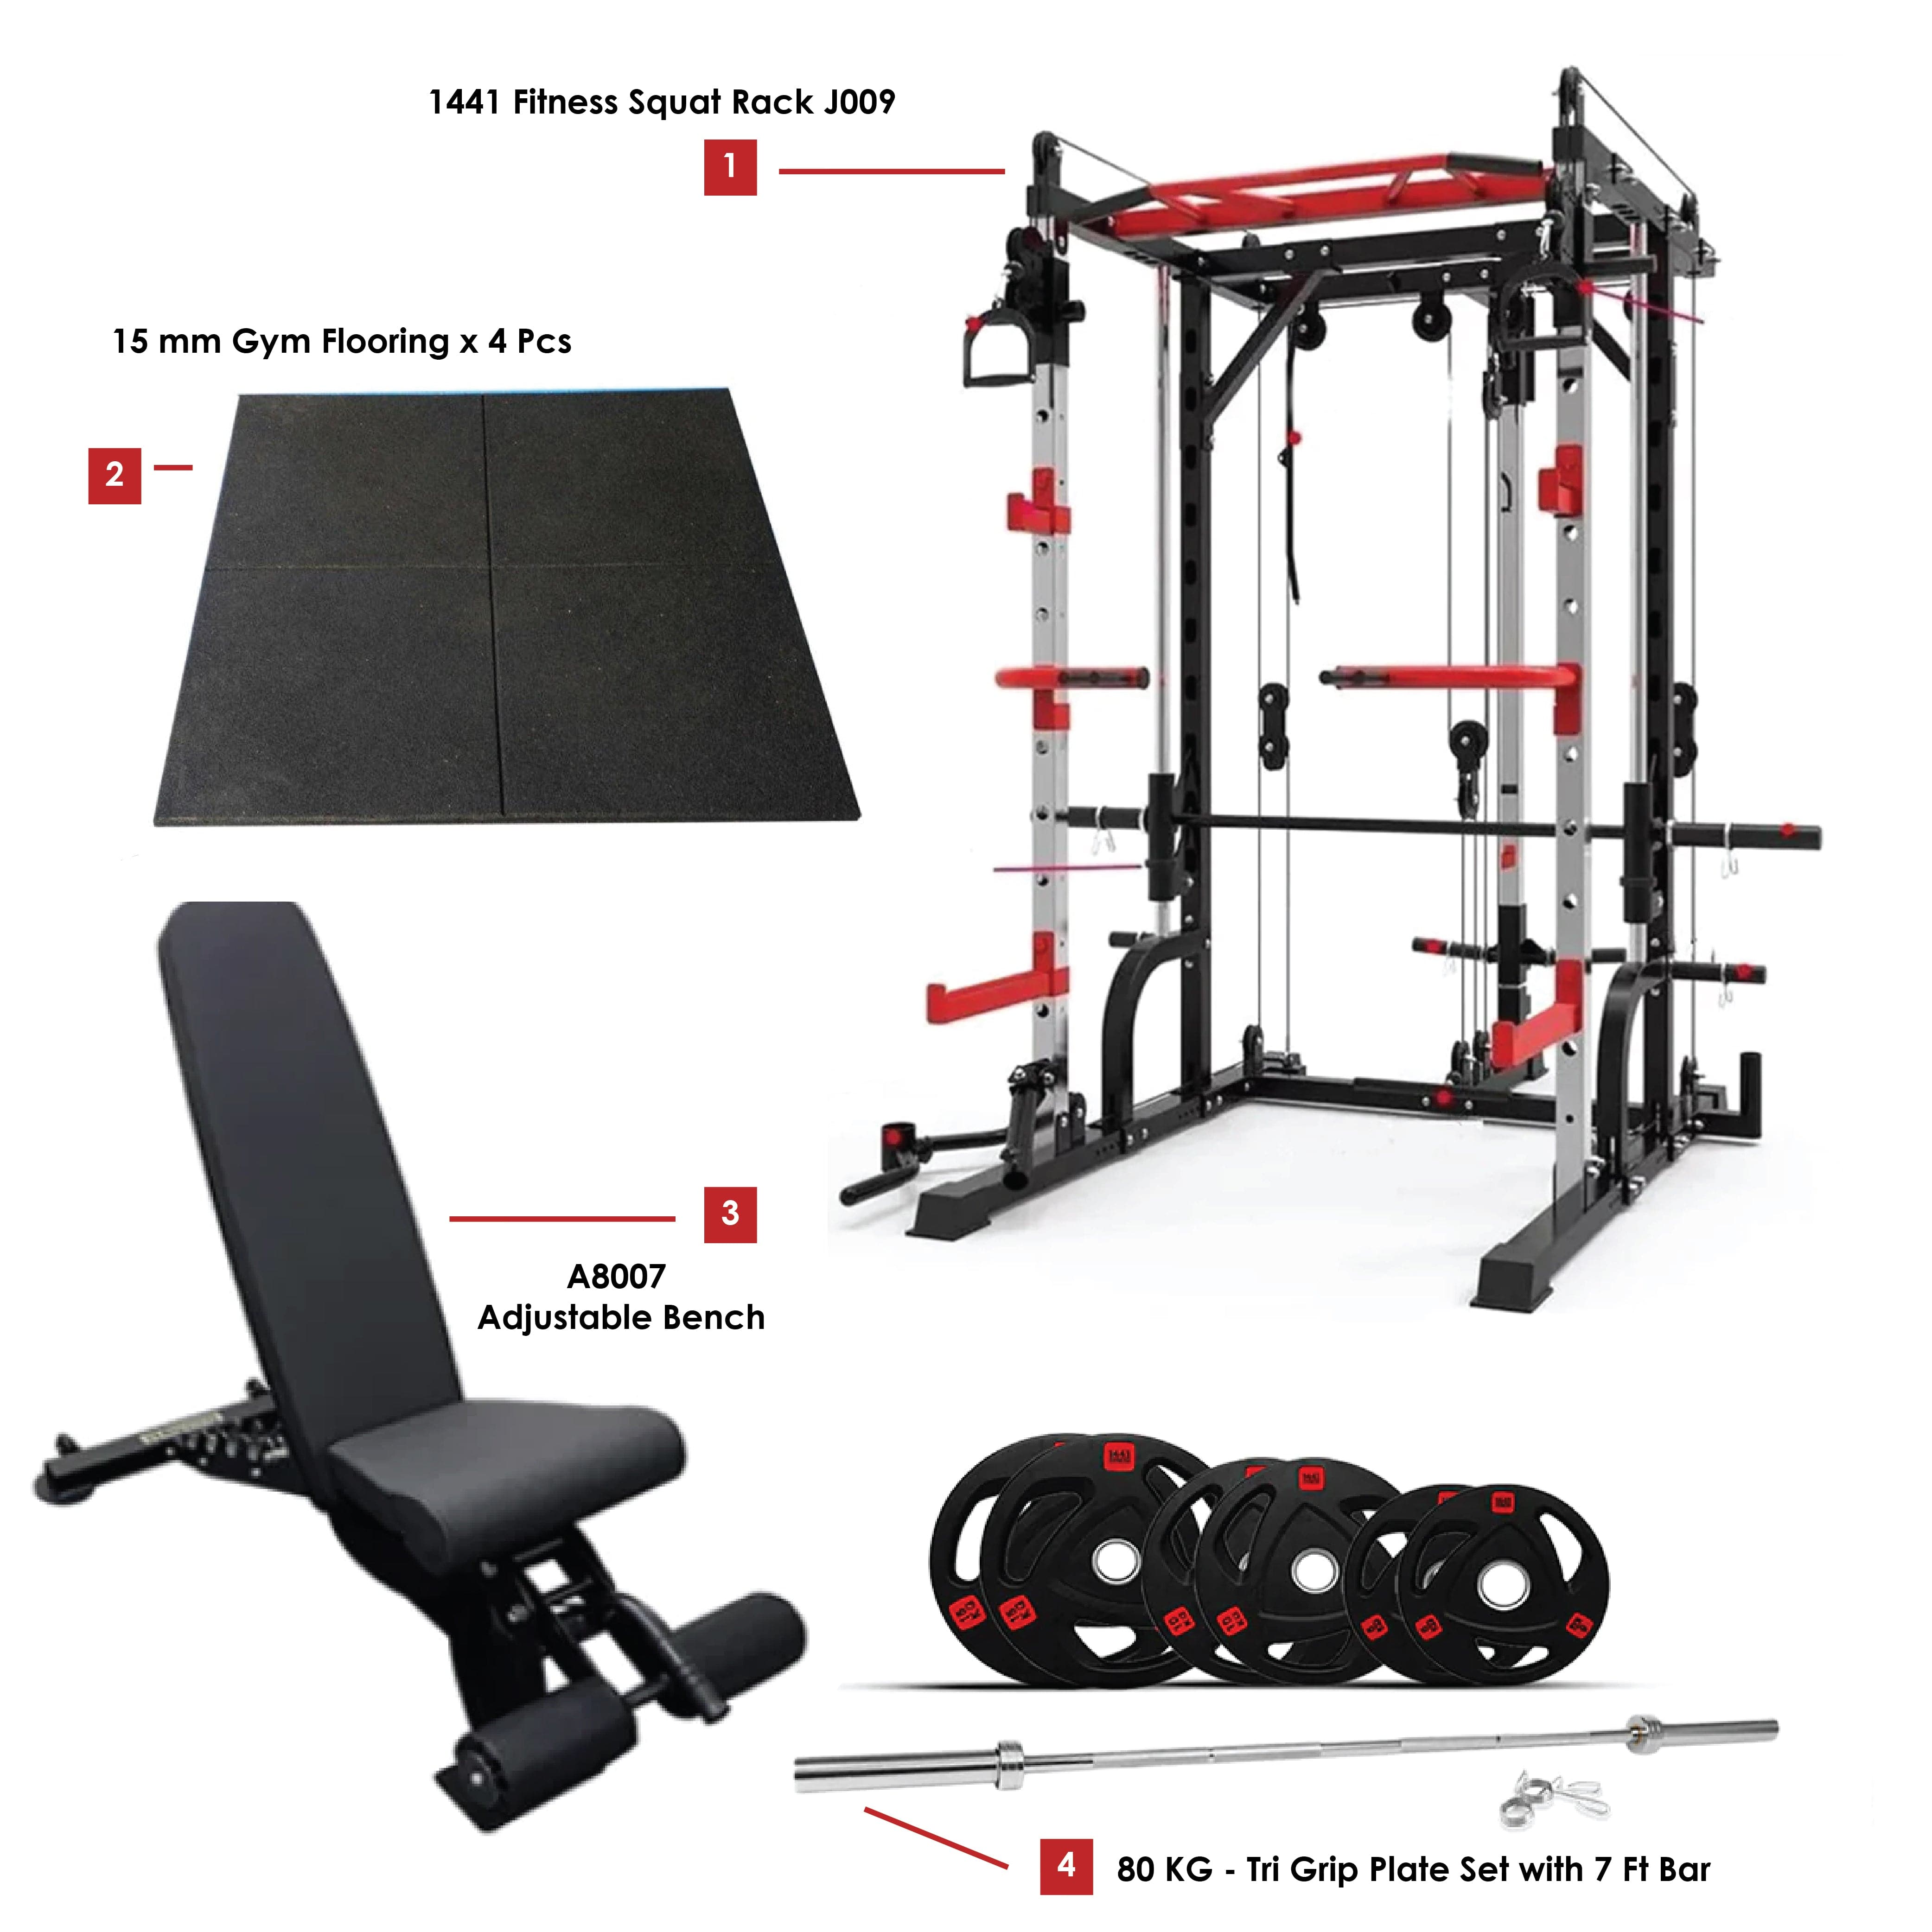 Combo Deal | 1441 Fitness Smith Machine With Functional Trainer J009 + 7 Ft Bar With Tri Grip 80 Kg Set + Adjustable Bench A8007 + 15 MM Flooring - Athletix.ae